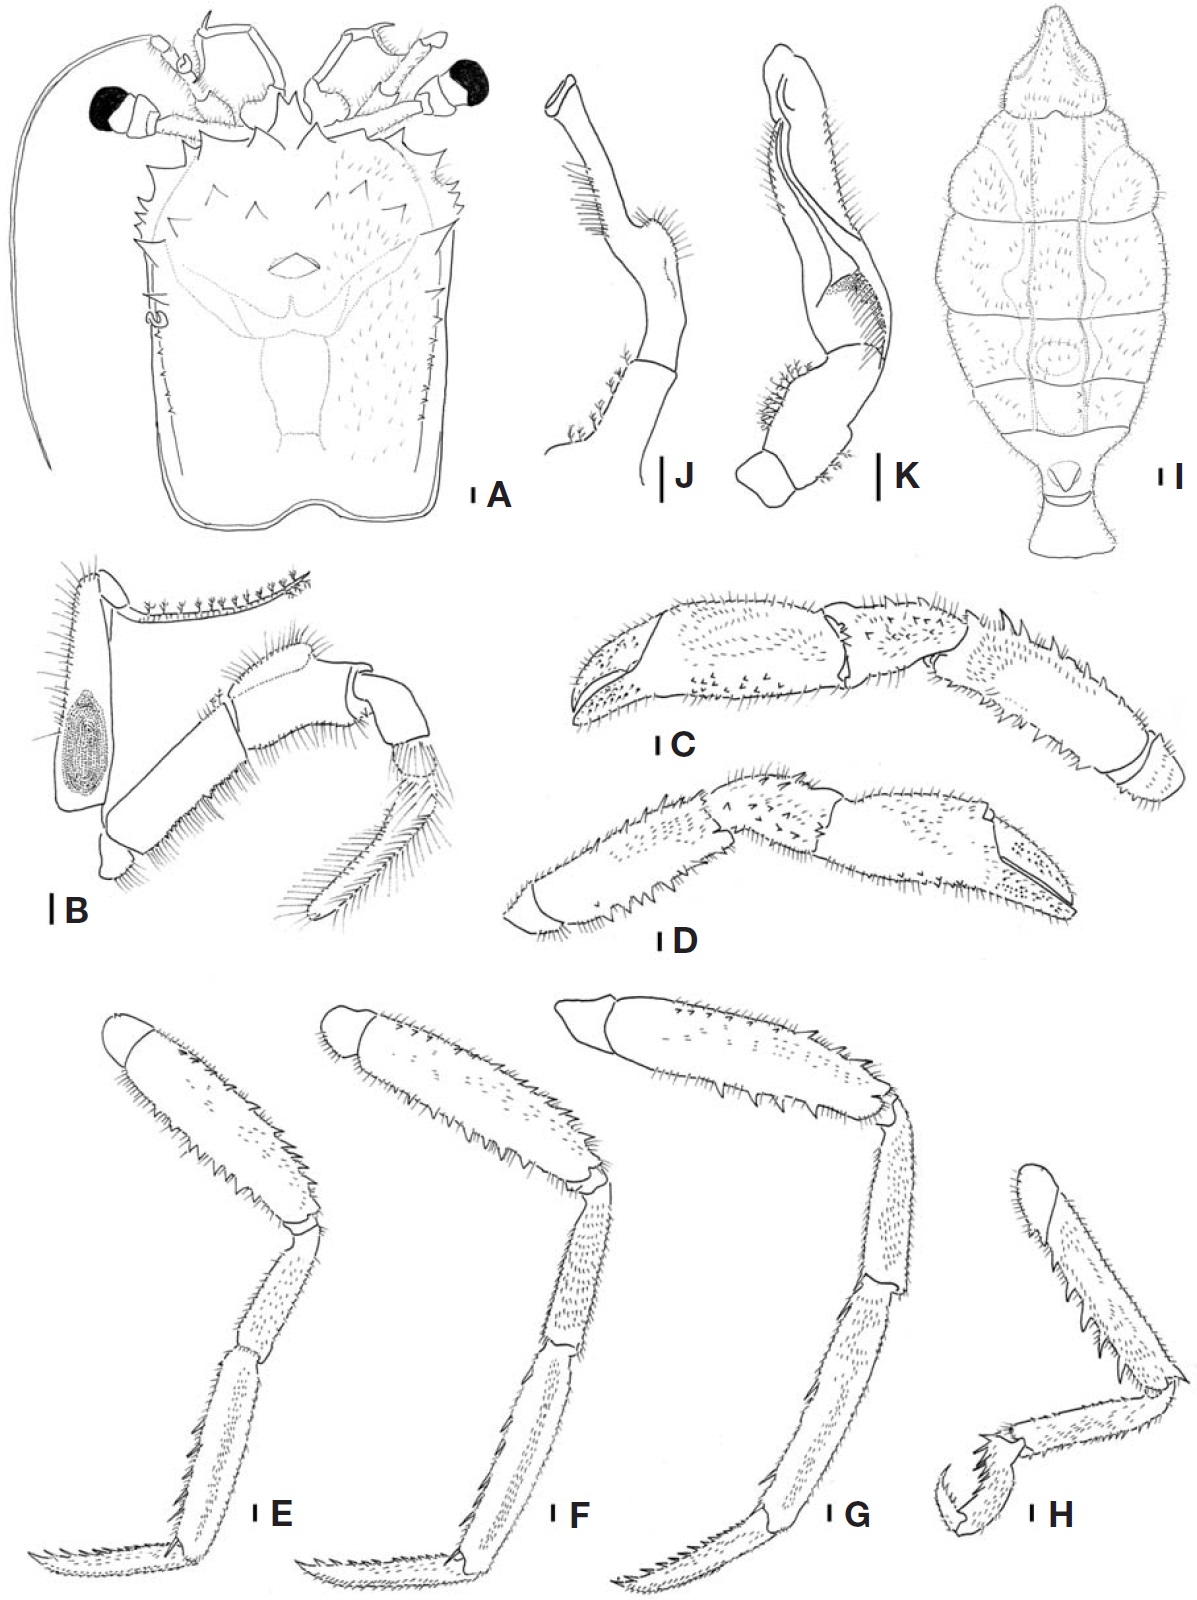 Homola orientalis, male (CL 25 mm, CW 19 mm). A, Dorsal view of carapace; B, Ventral view of left third maxilliped; C, D, Ventral views of chelipeds; E-H, First to fourth ambulatory legs; I, Male abdomen; J, First gonopod; K, Second gonopod. CL, carapace length from the tip of the frontal margin to the posterior dorsal margin of the carapace; CW, the width of the carapace measured at the widest part. Scale bars: A-K=1 mm.